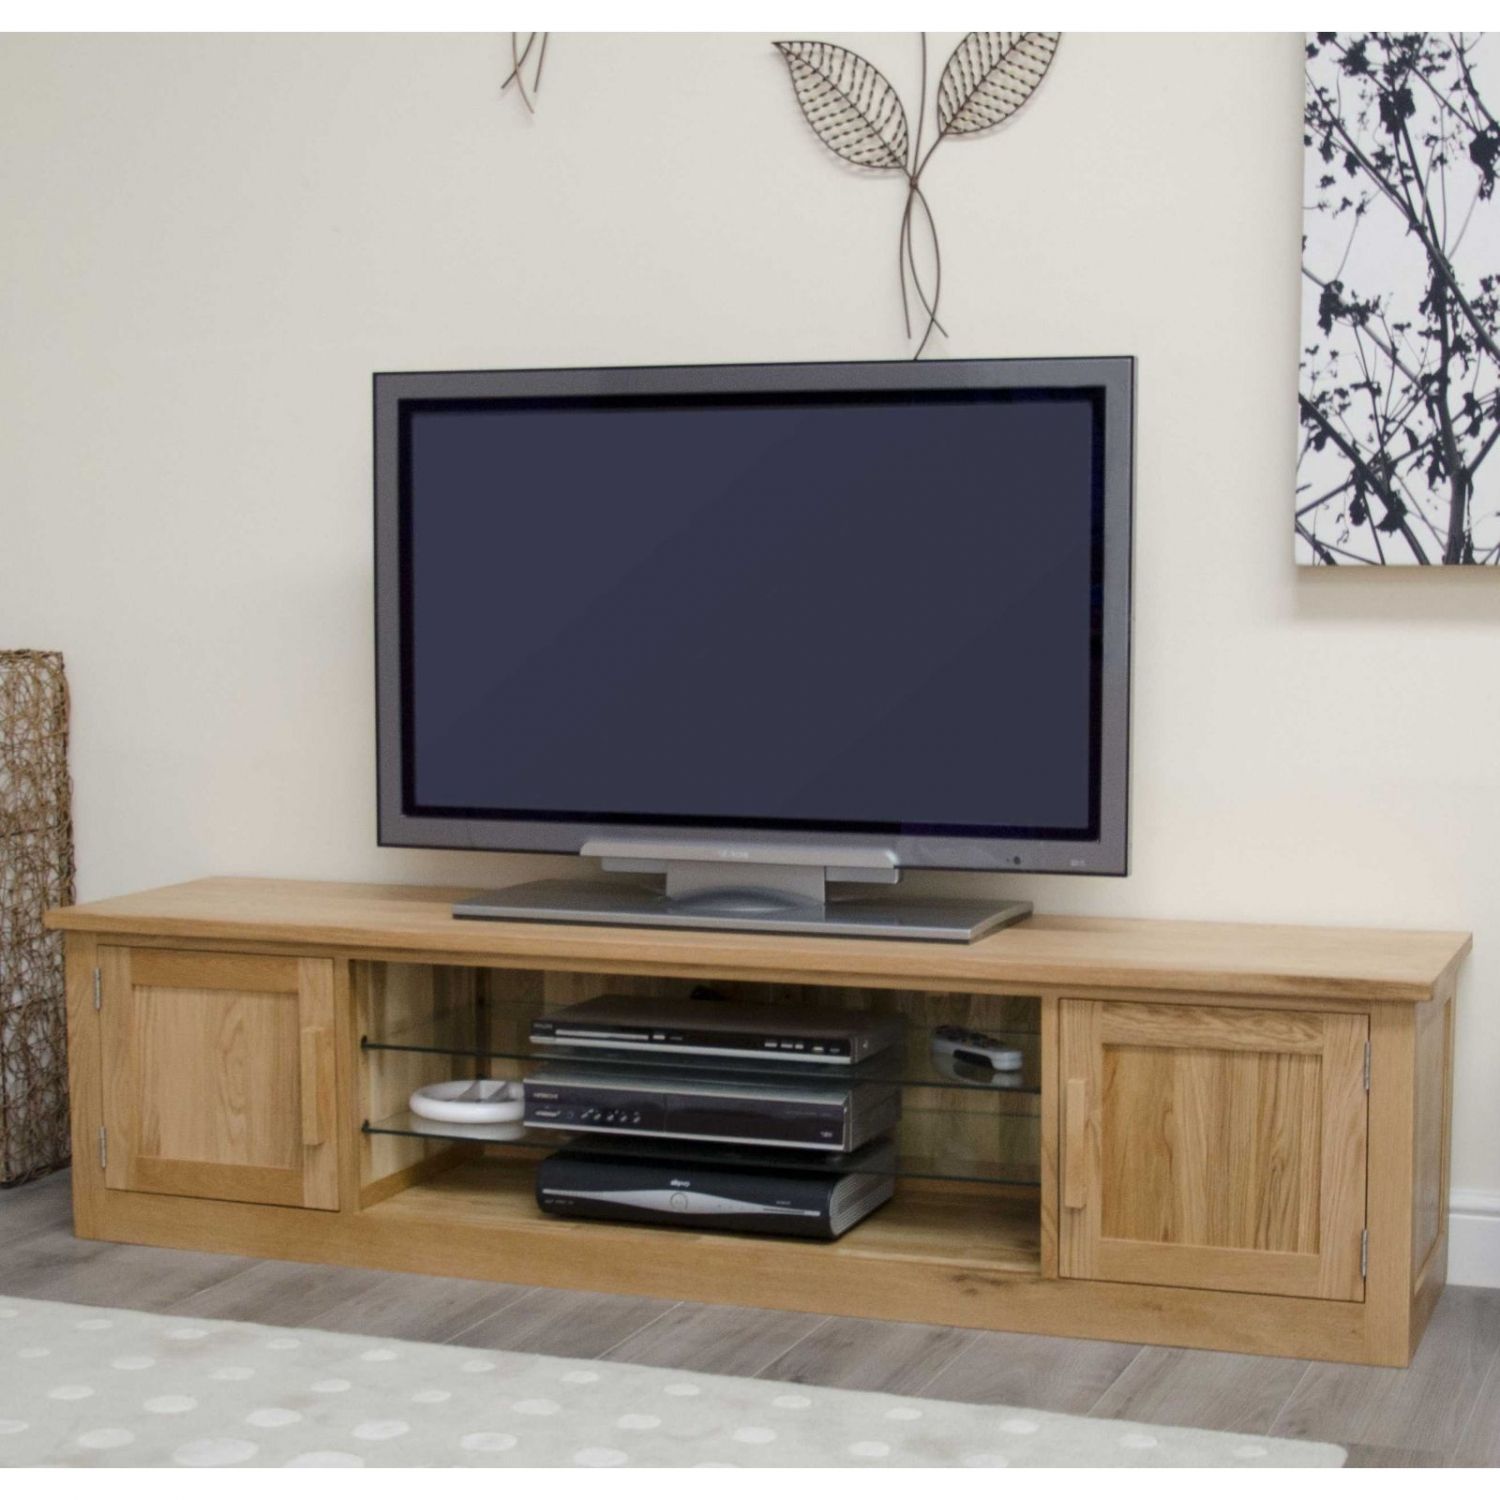 Arden Solid Oak Living Room Furniture Large Widescreen Tv With Regard To Large Oak Tv Cabinets (View 13 of 15)